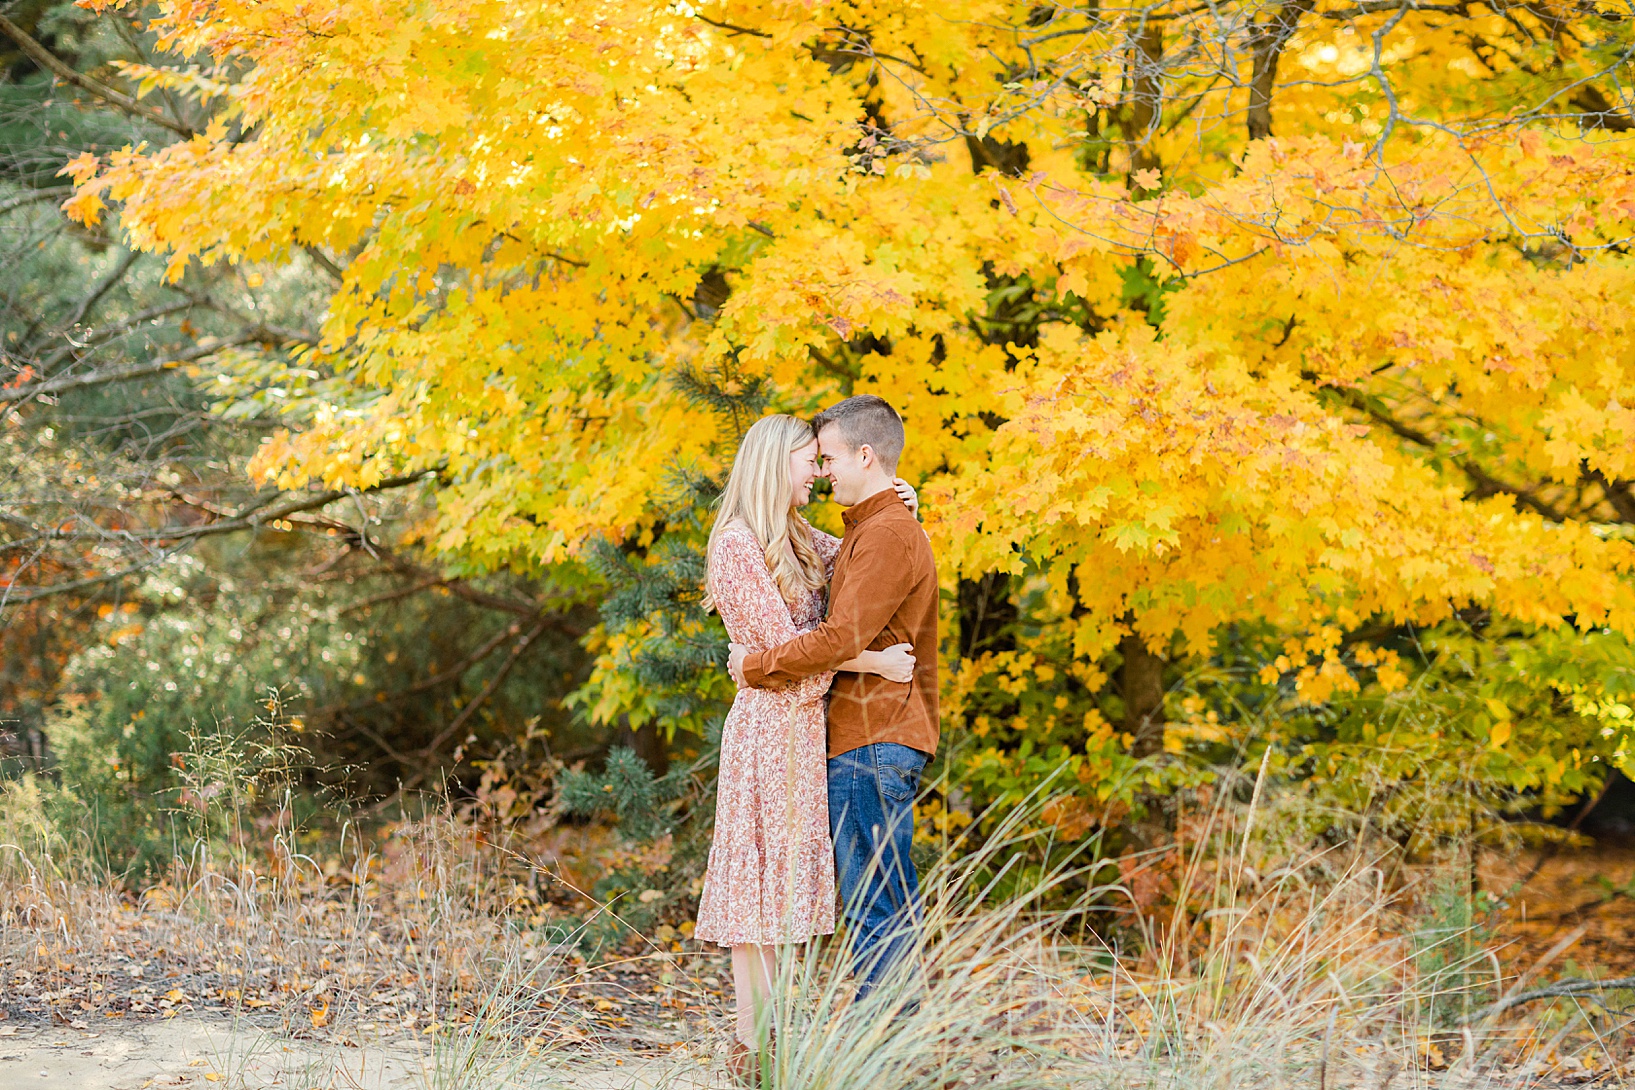 Kendall & Luke | a Rosy Mound Natural Area Engagement - Tauri Baum ...